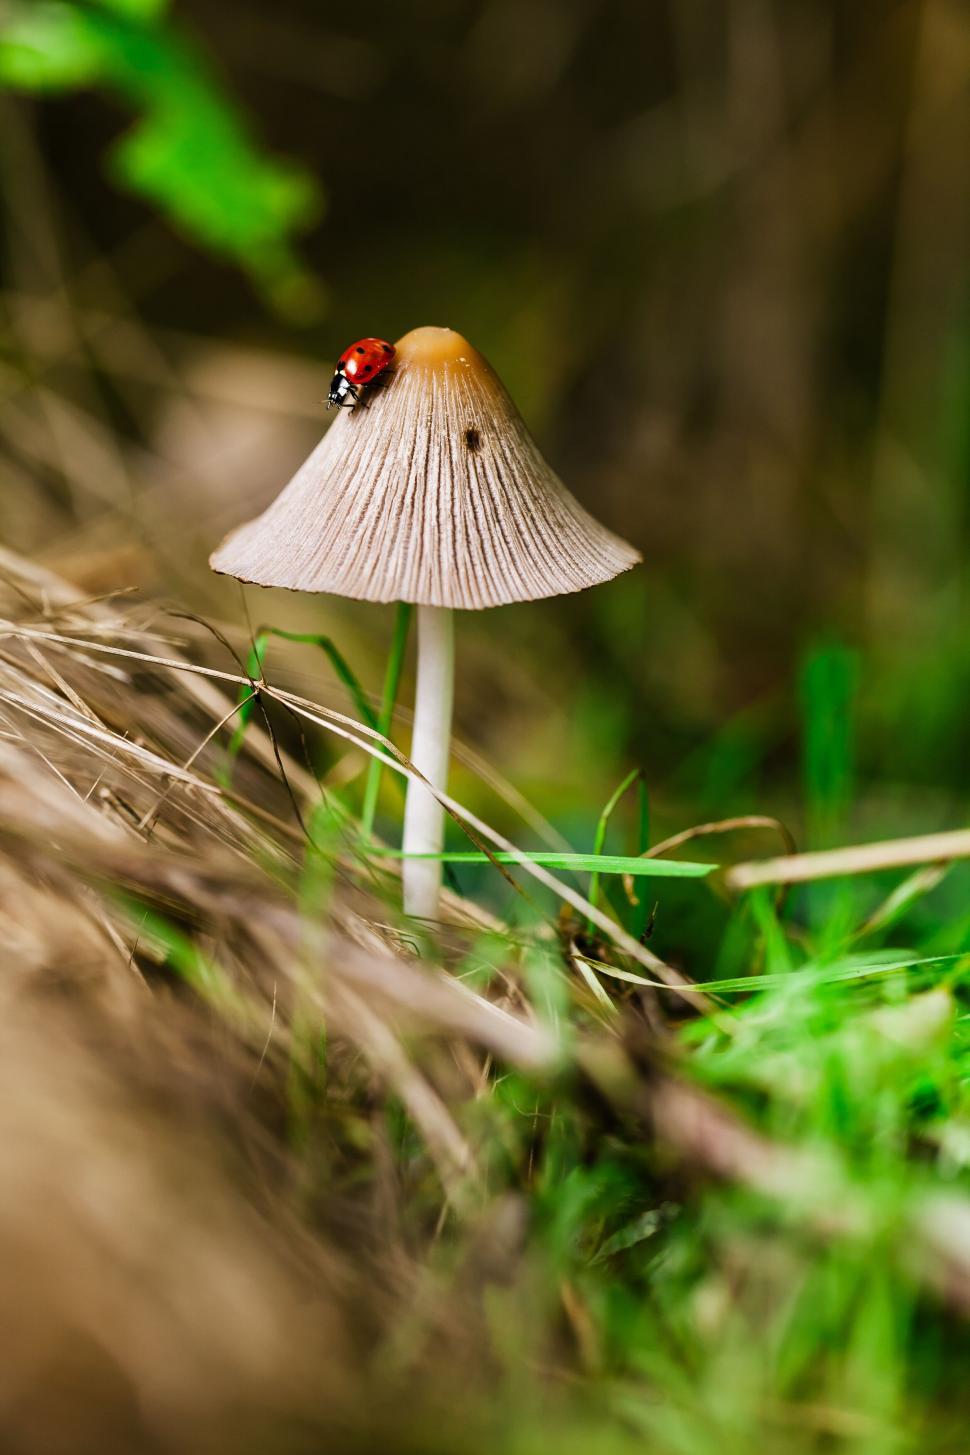 Free Image of Ladybug on a mushroom in a natural setting 